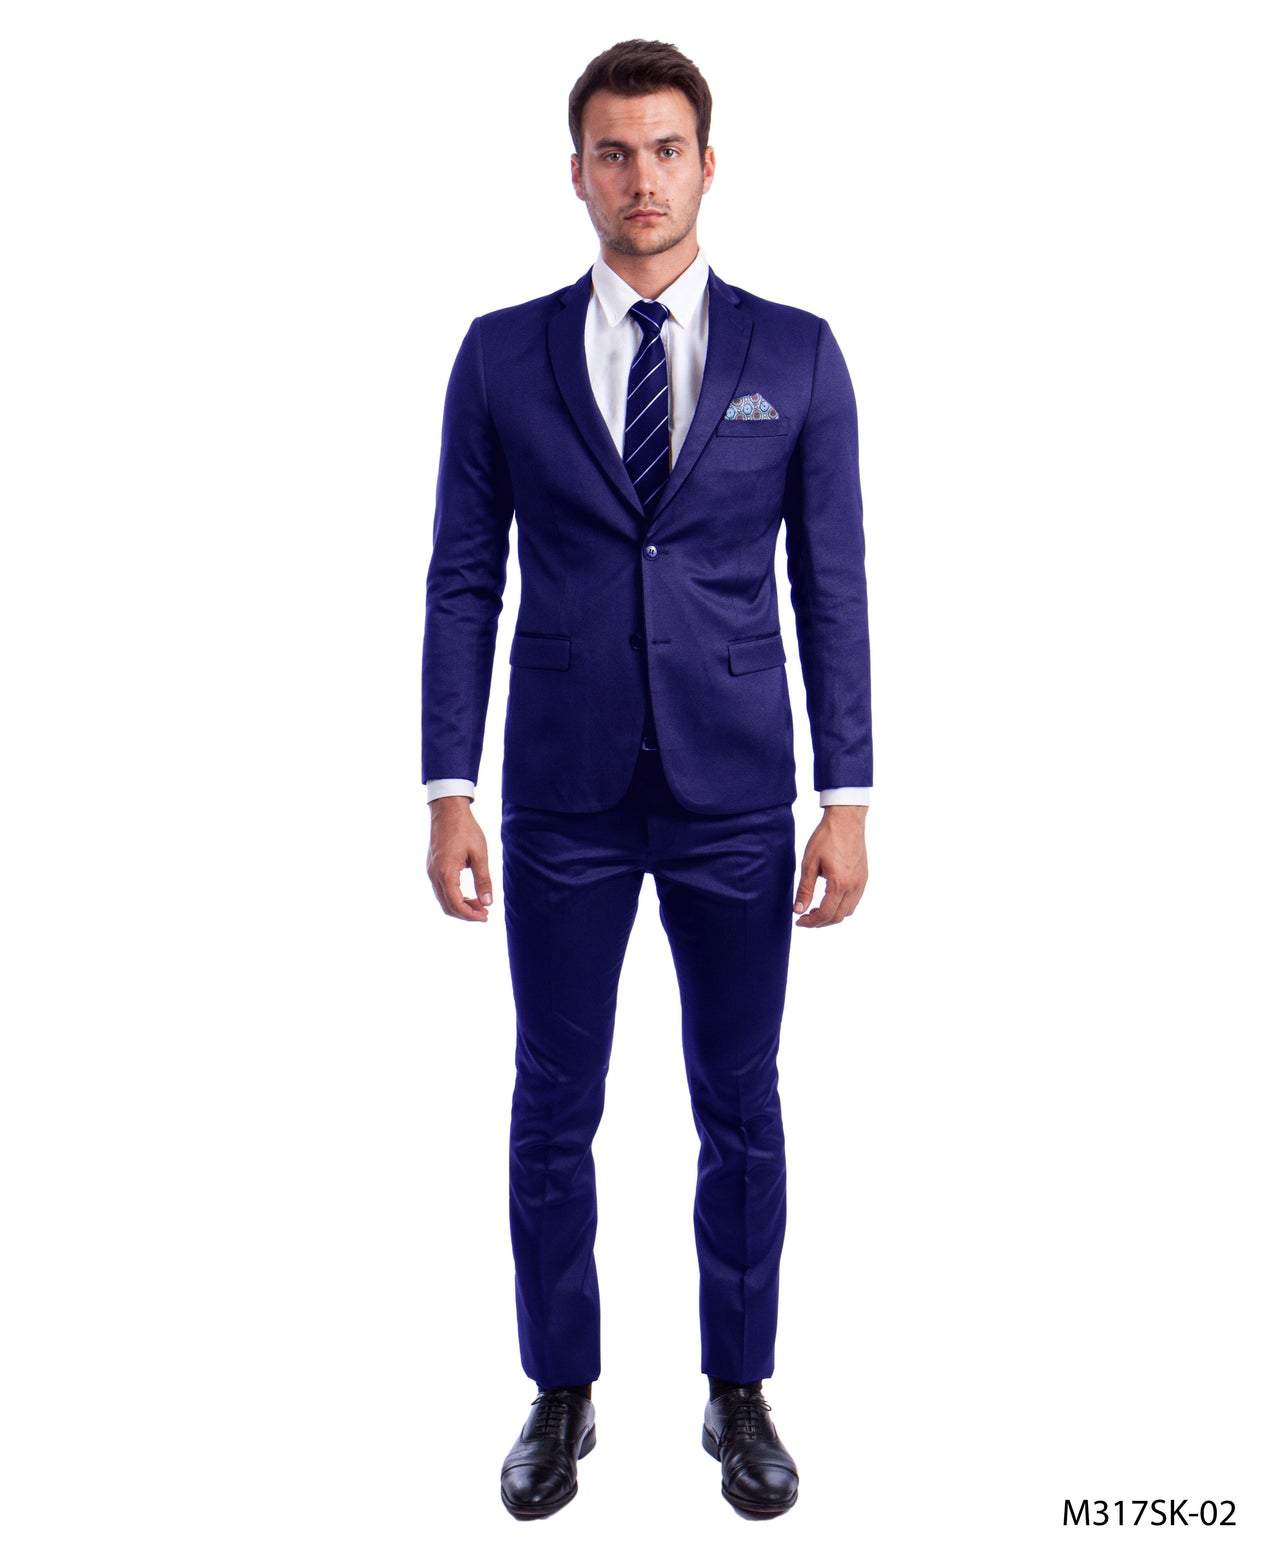 Blue Suit For Men Formal Suits For All Ocassions - Hattitude